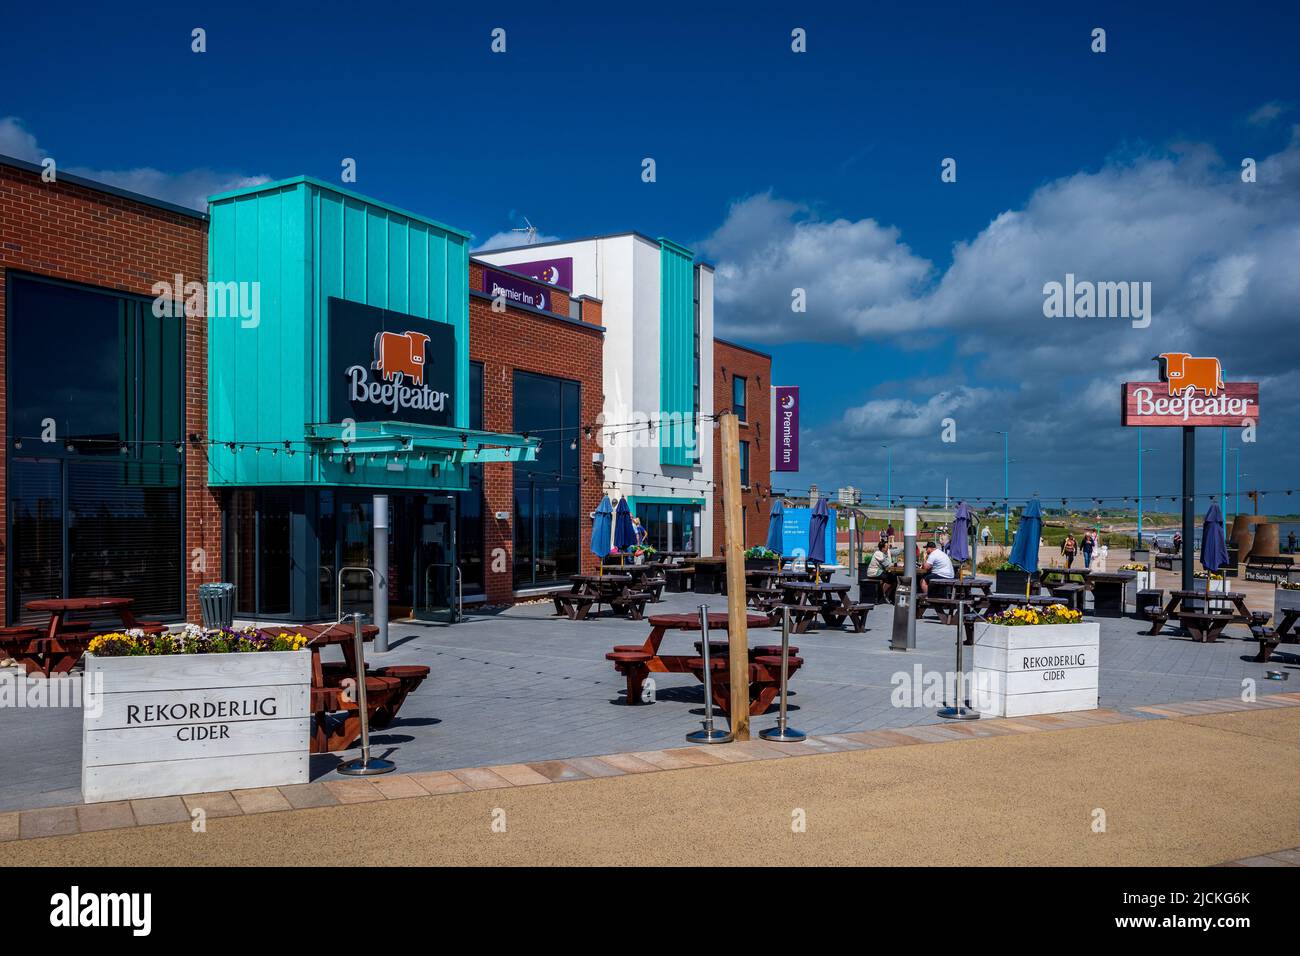 Beefeater Restaurant Whitley Bay North Tyneside. Beefeater is a chain of around140 pub restaurants in the United Kingdom. Owned by Whitbread. Stock Photo